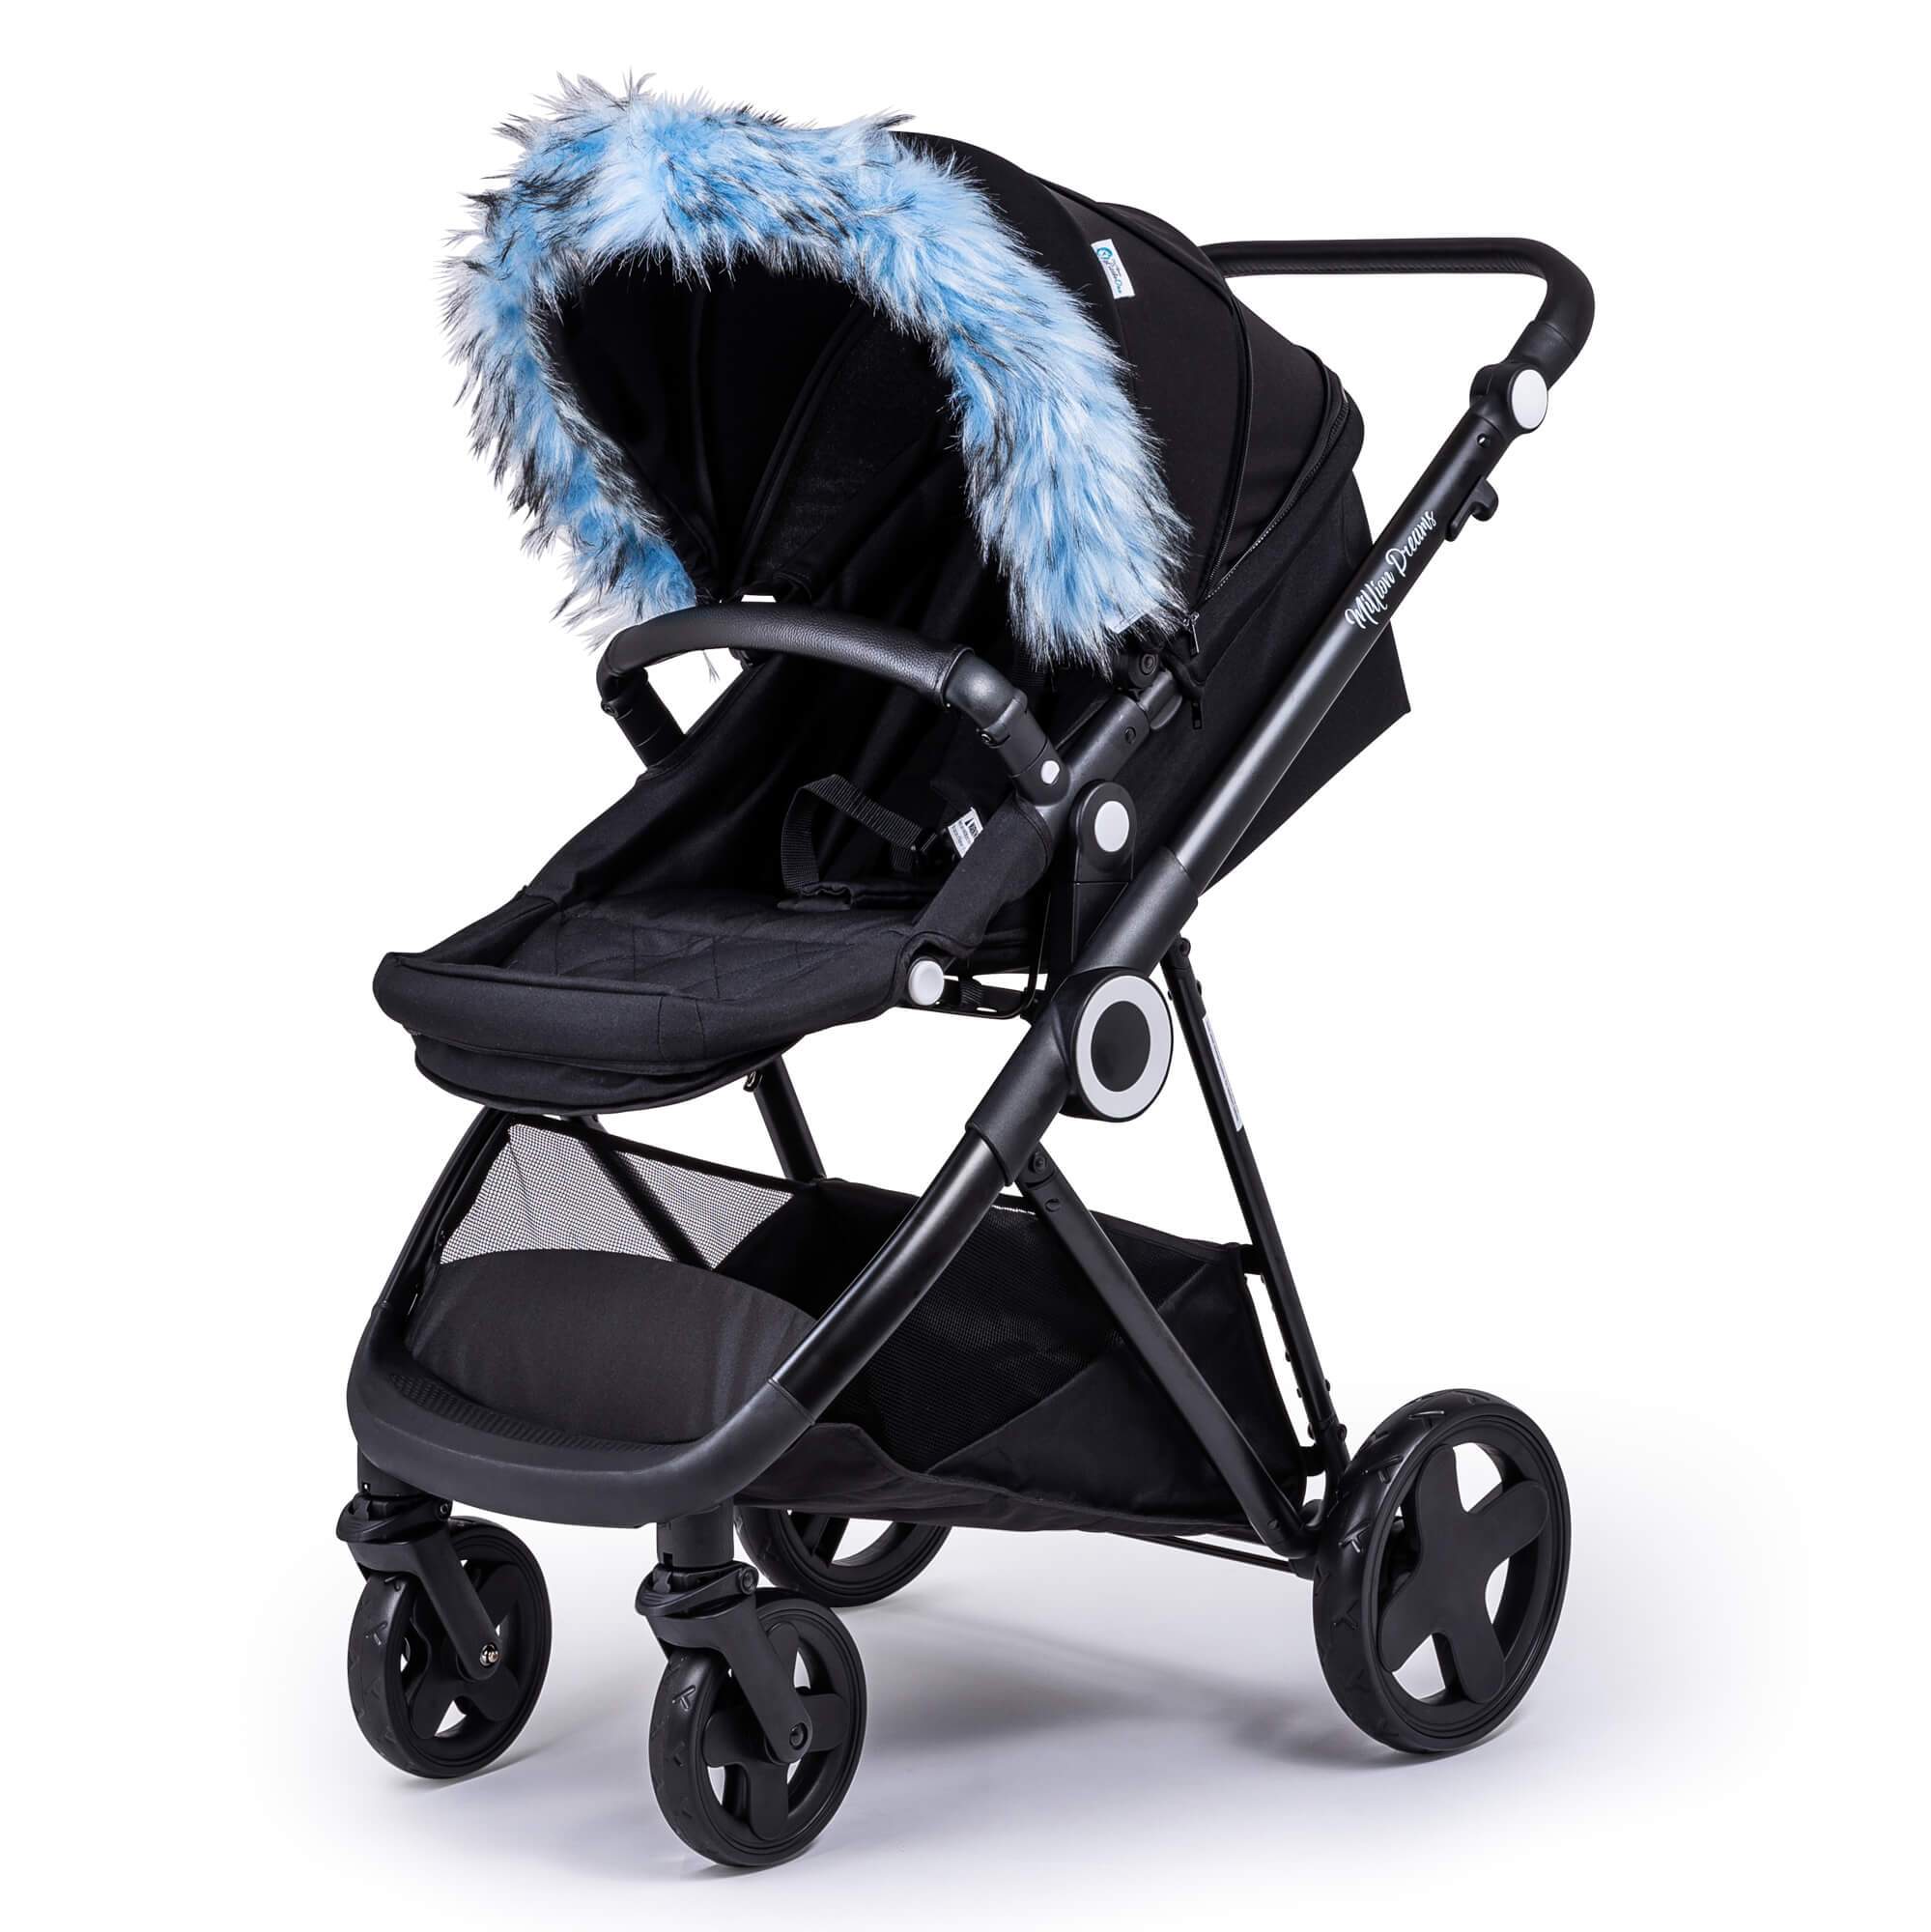 Pram Fur Hood Trim Attachment for Pushchair Compatible with TFK - Light Blue / Fits All Models | For Your Little One